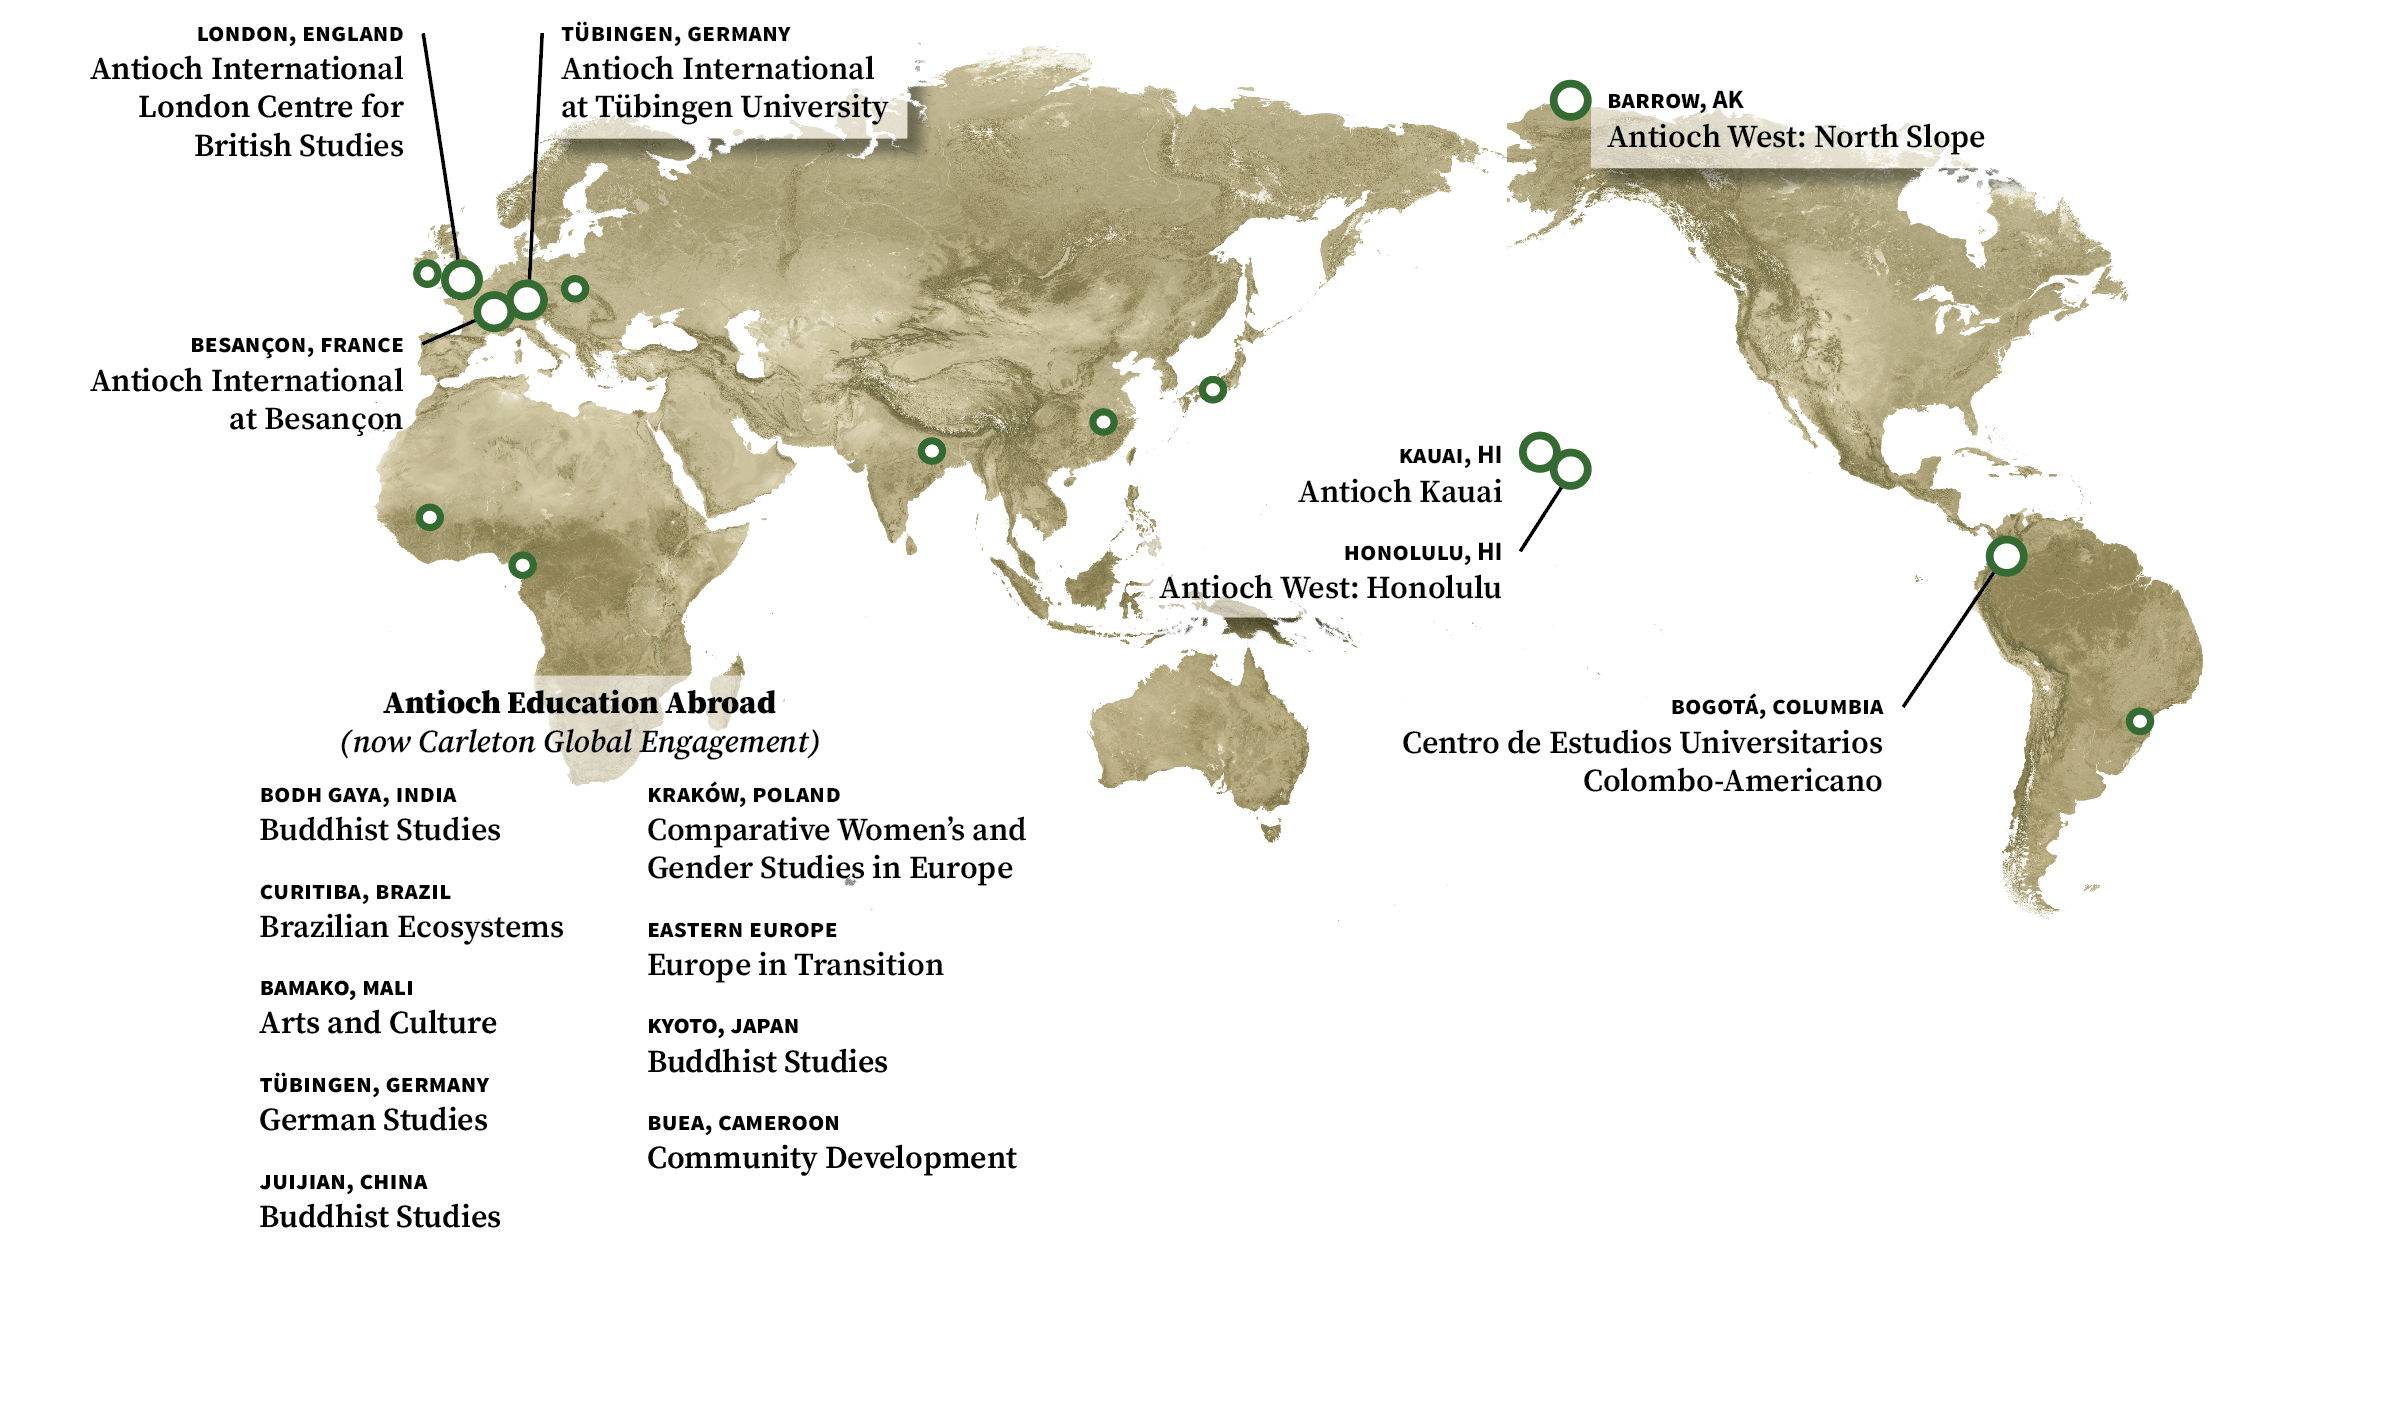 A map showing closed Antioch campus locations across the globe.